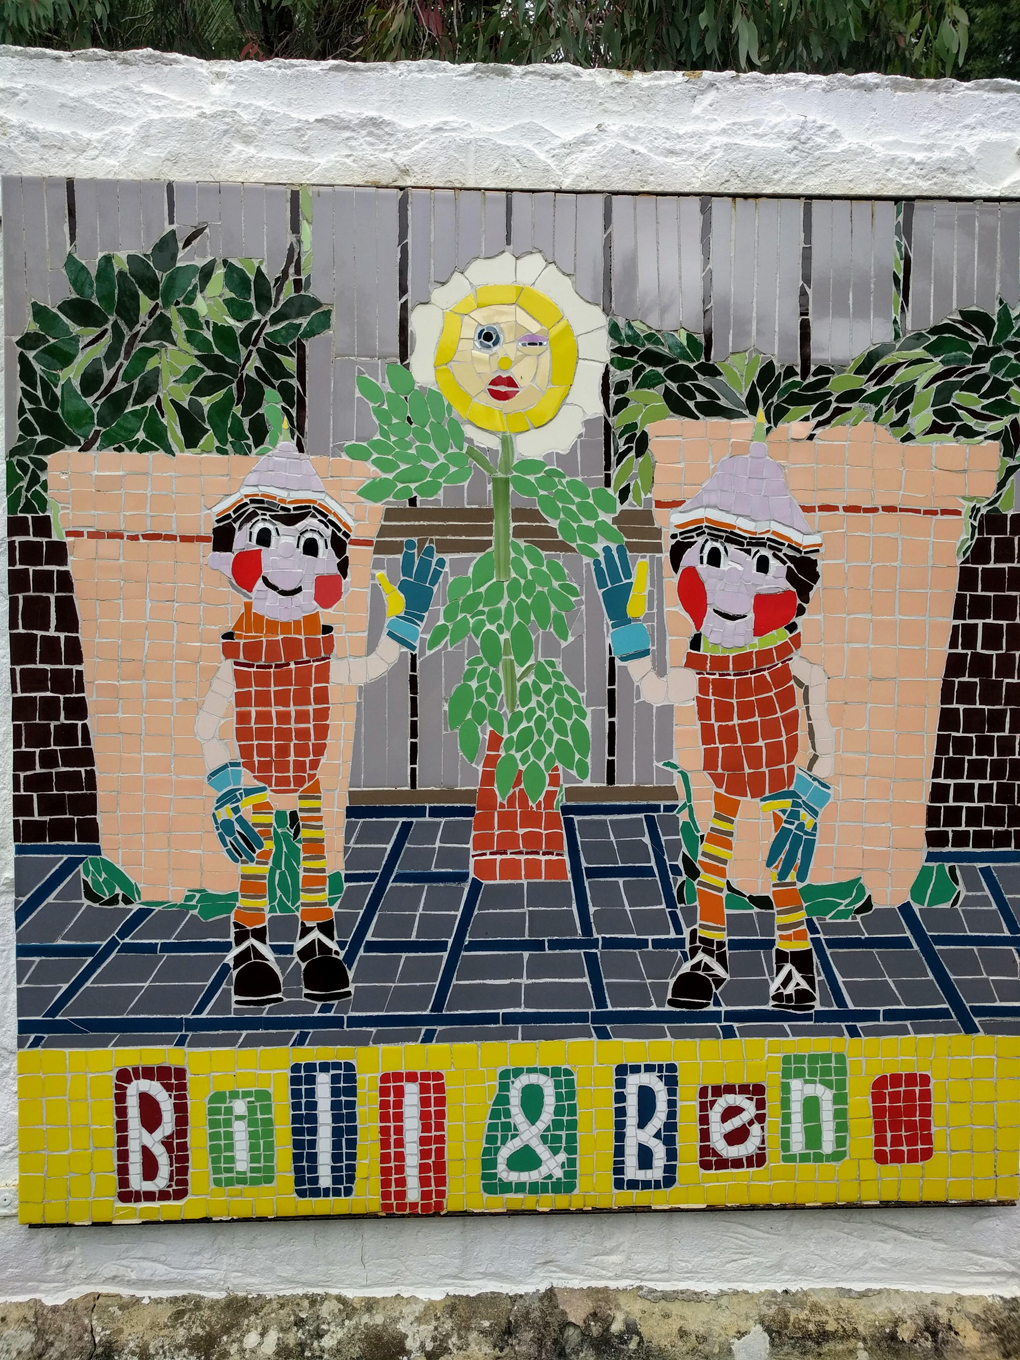 A mosaic of Bill and Ben from the old TV programme.